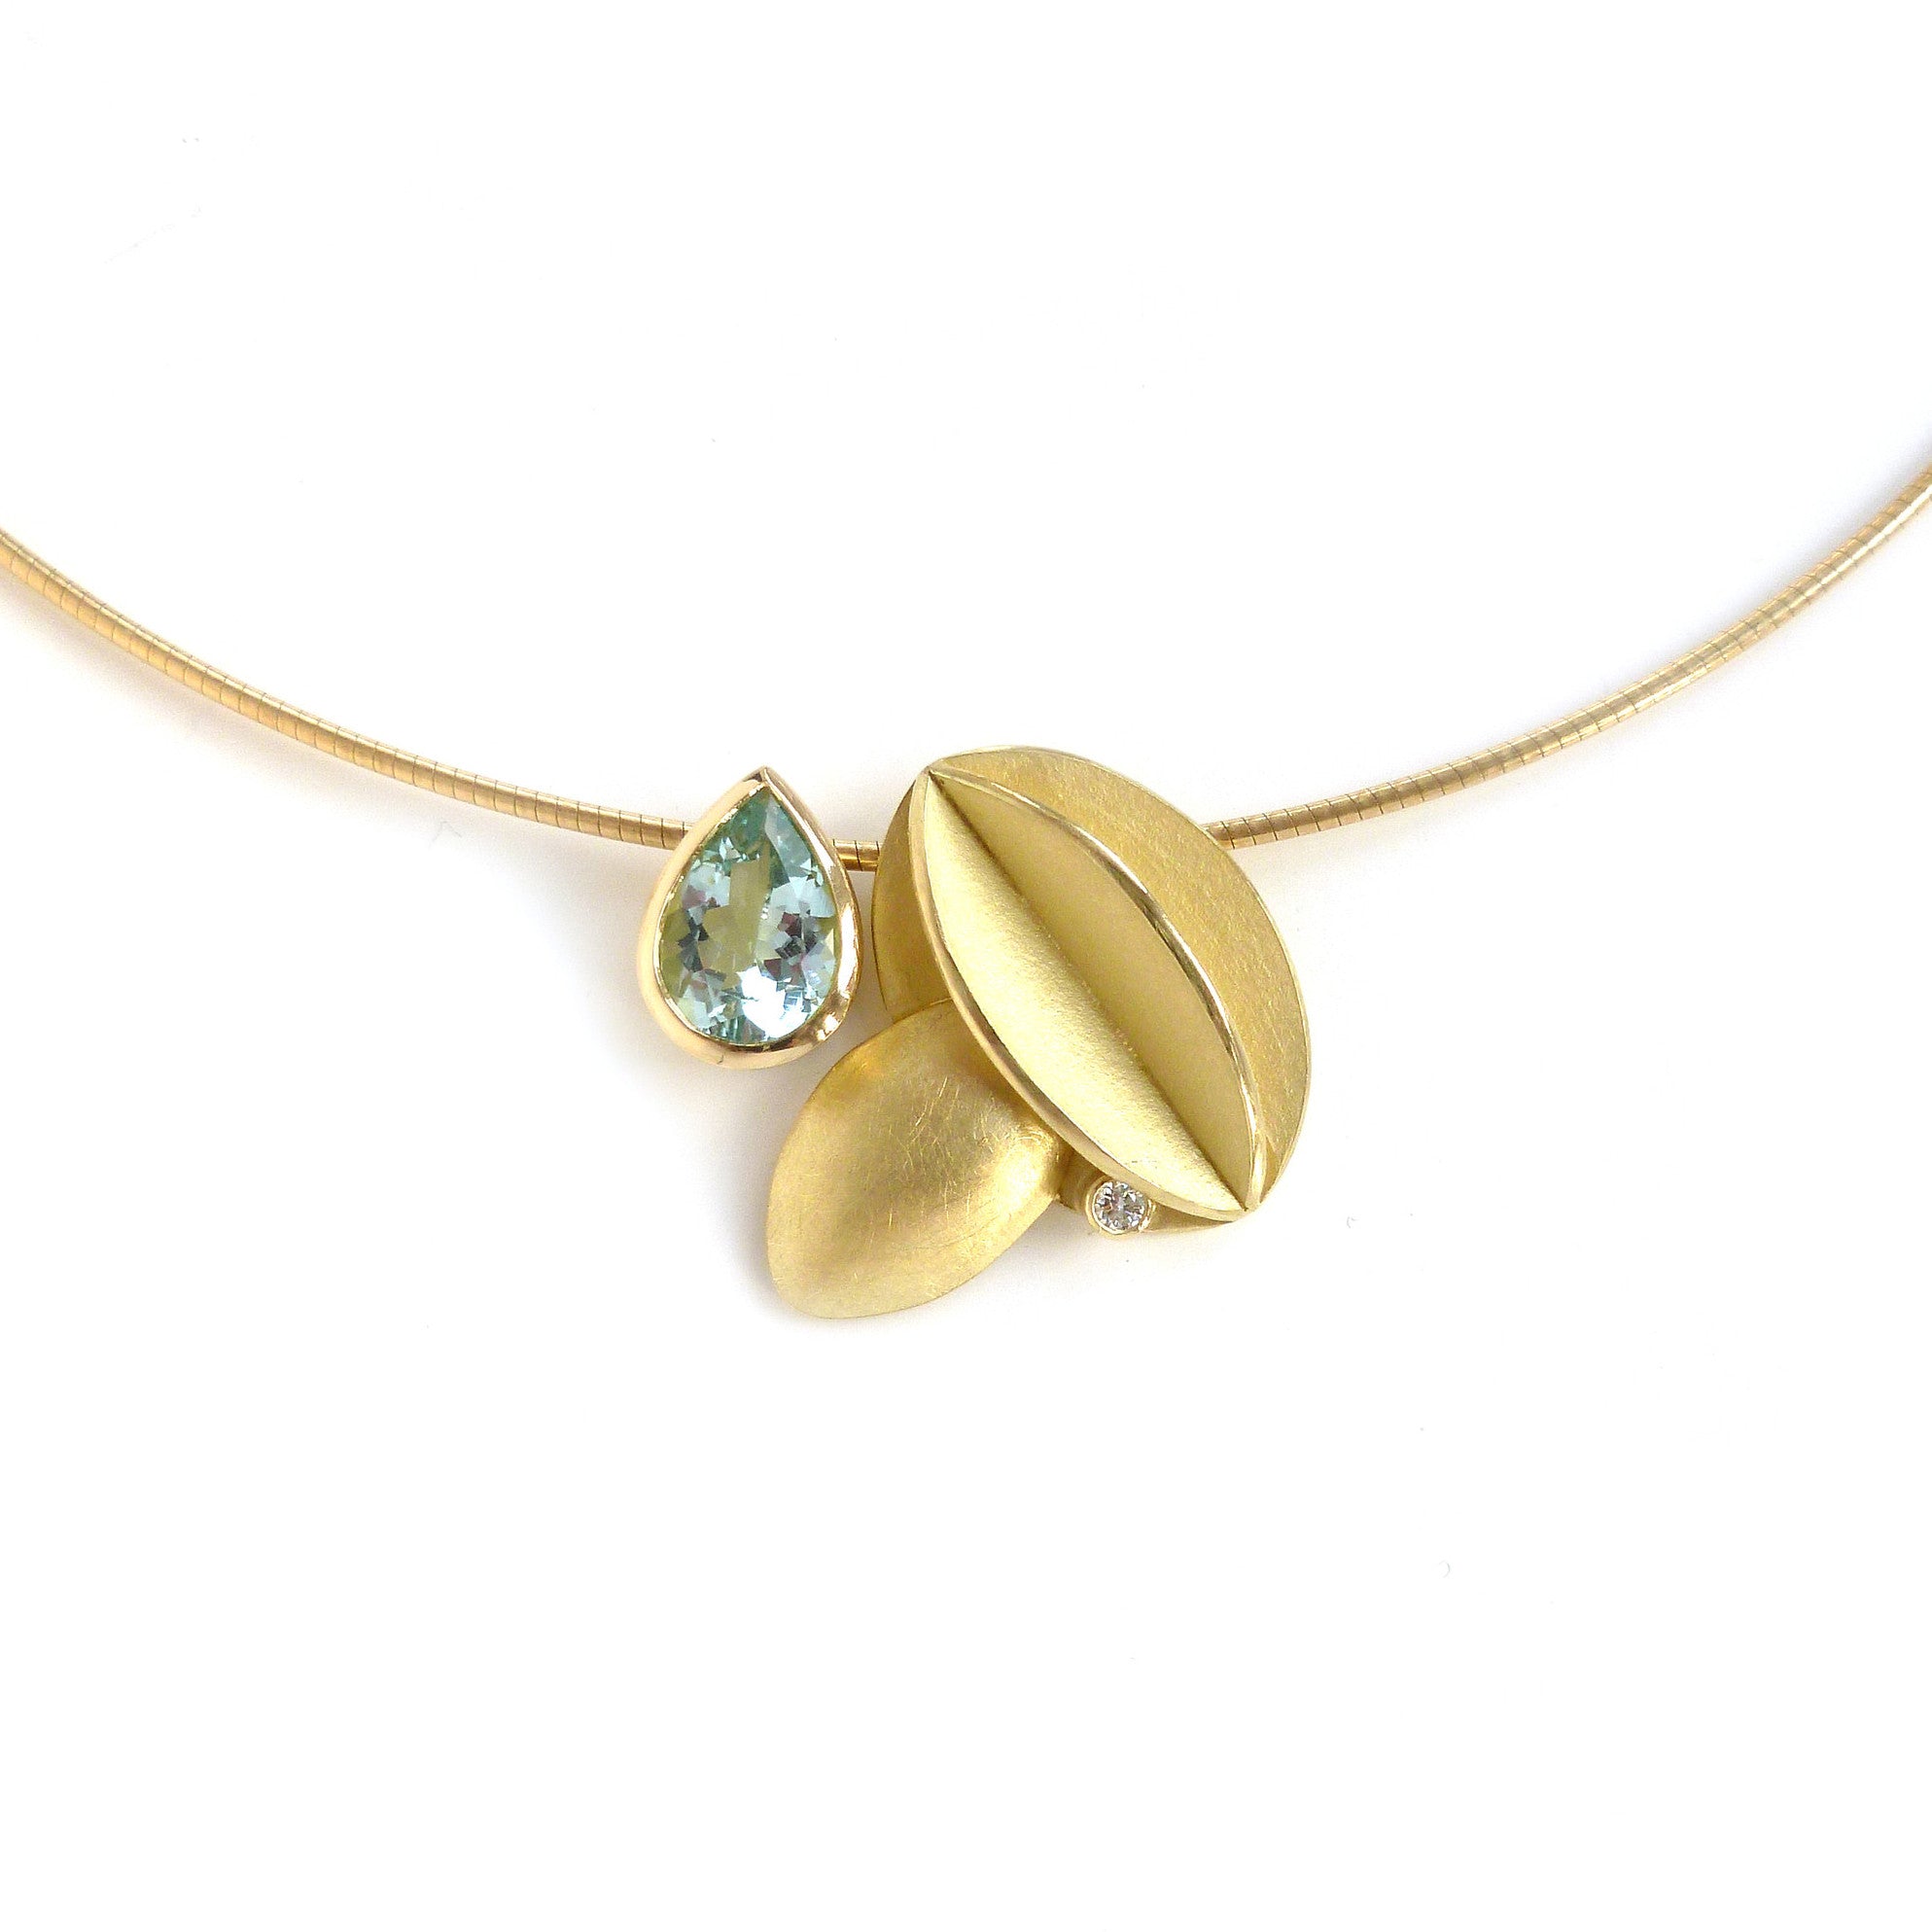 Contemporary bold and modern gold and aquamarine necklace handmade by designer maker Sue Lane Jewellery UK. Made to commission 